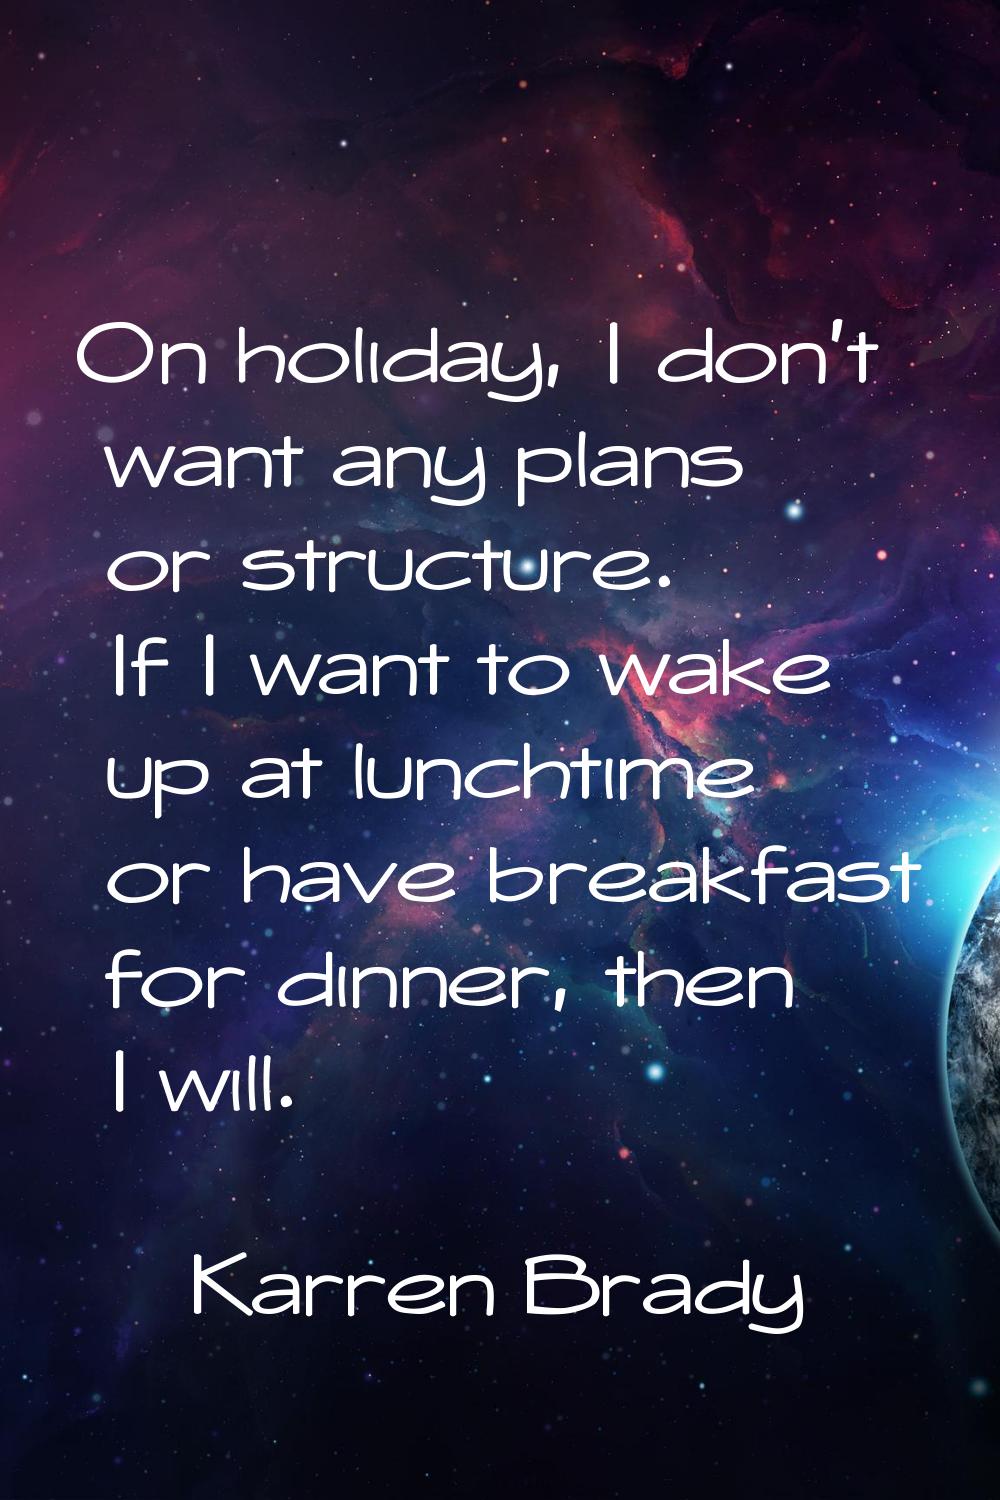 On holiday, I don't want any plans or structure. If I want to wake up at lunchtime or have breakfas